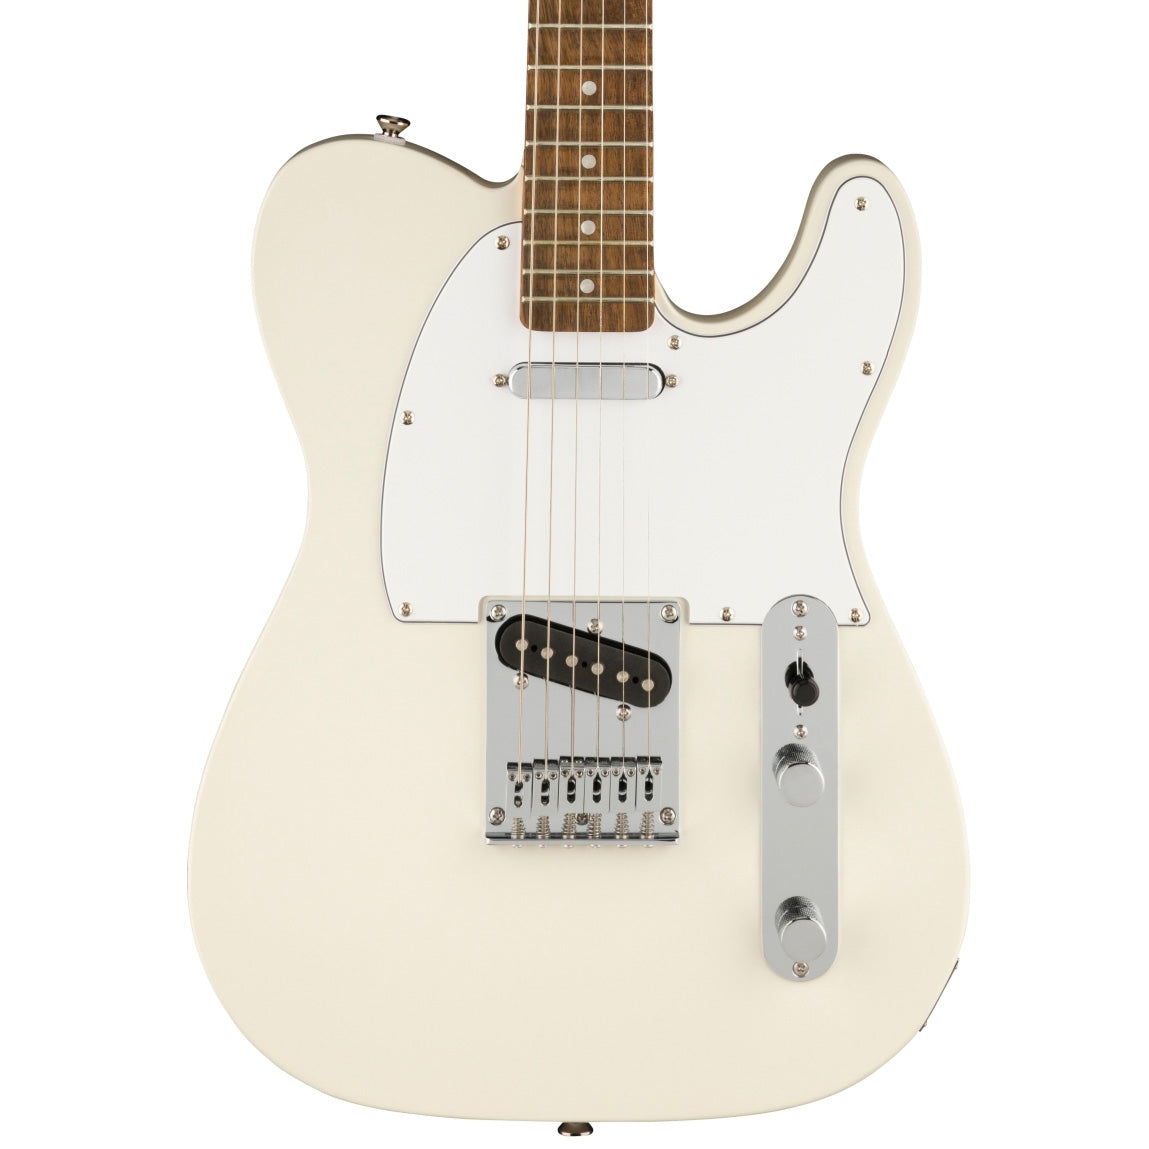 Squier Affinity Telecaster - Laurel, Olympic White View 